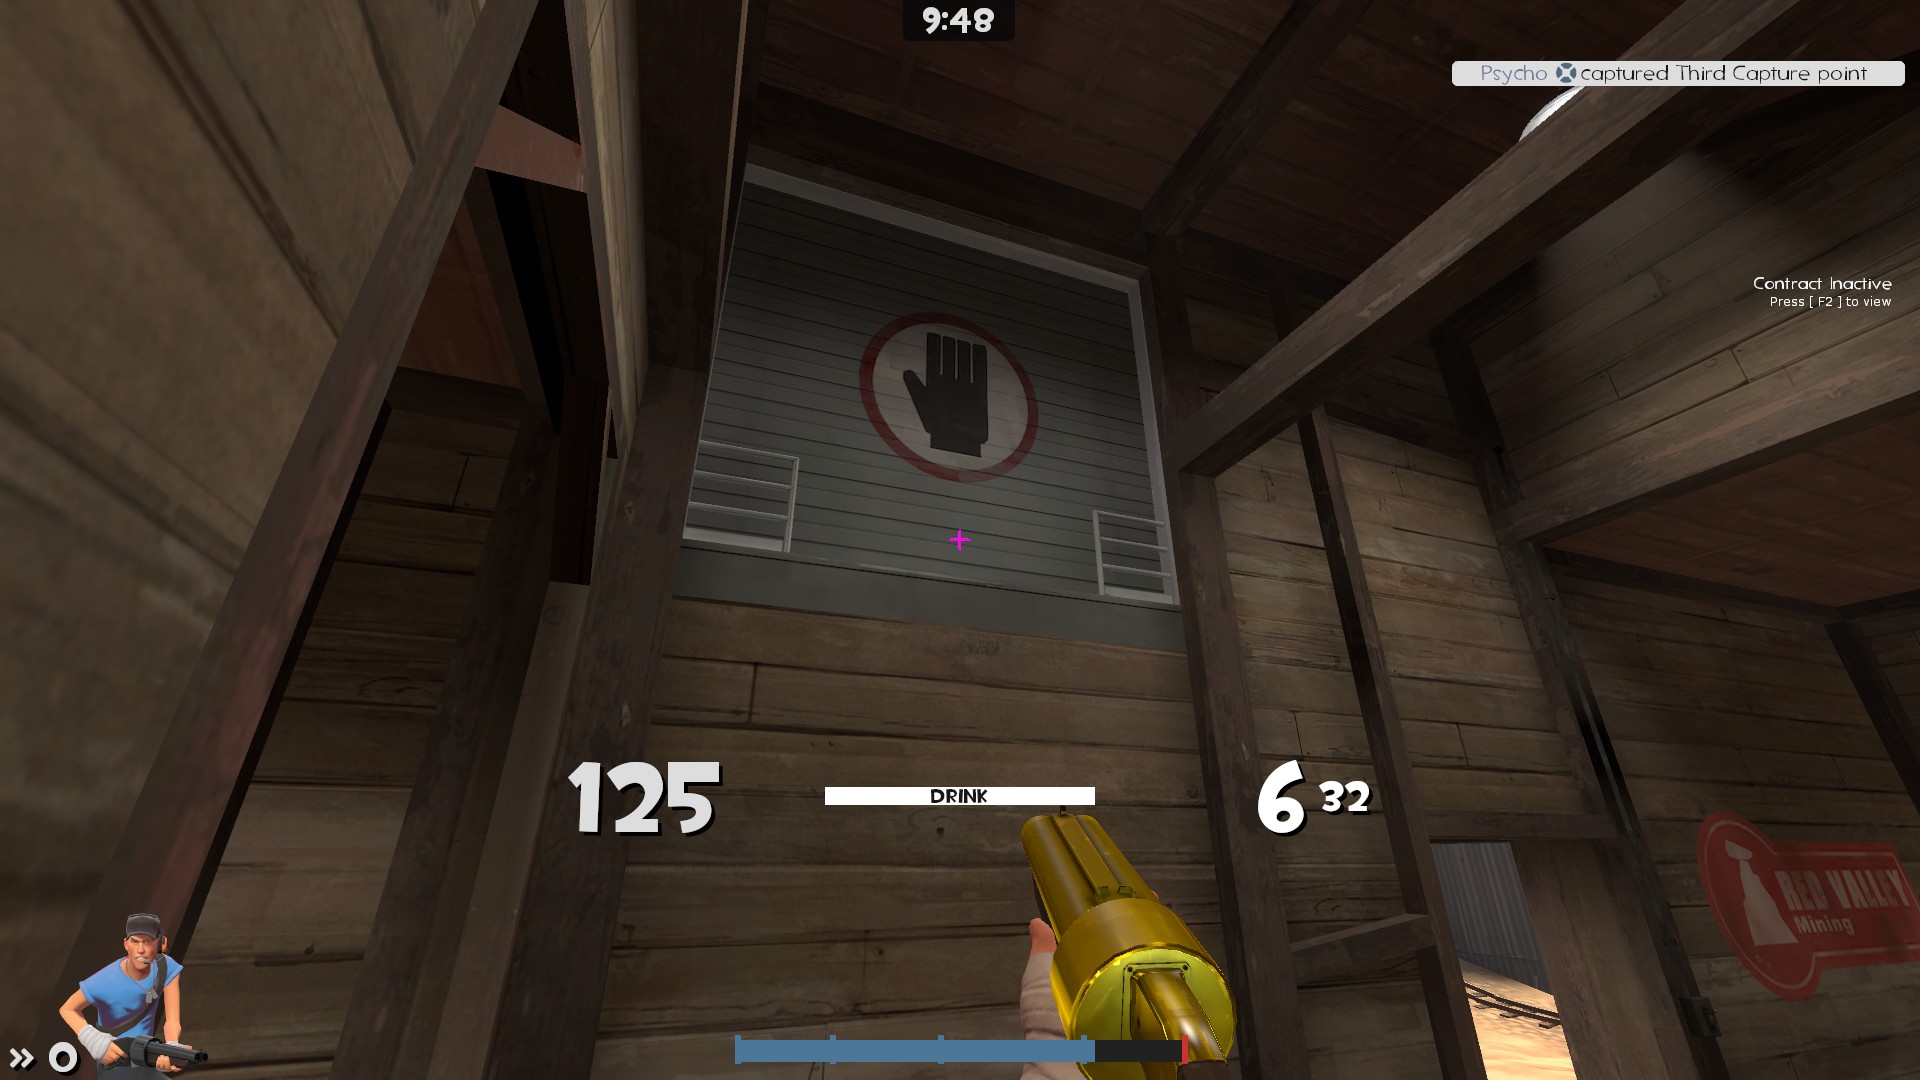 Team Fortress 2 - Secret Door Location Guide and Tips - When it opens & closes - 9BB65EA